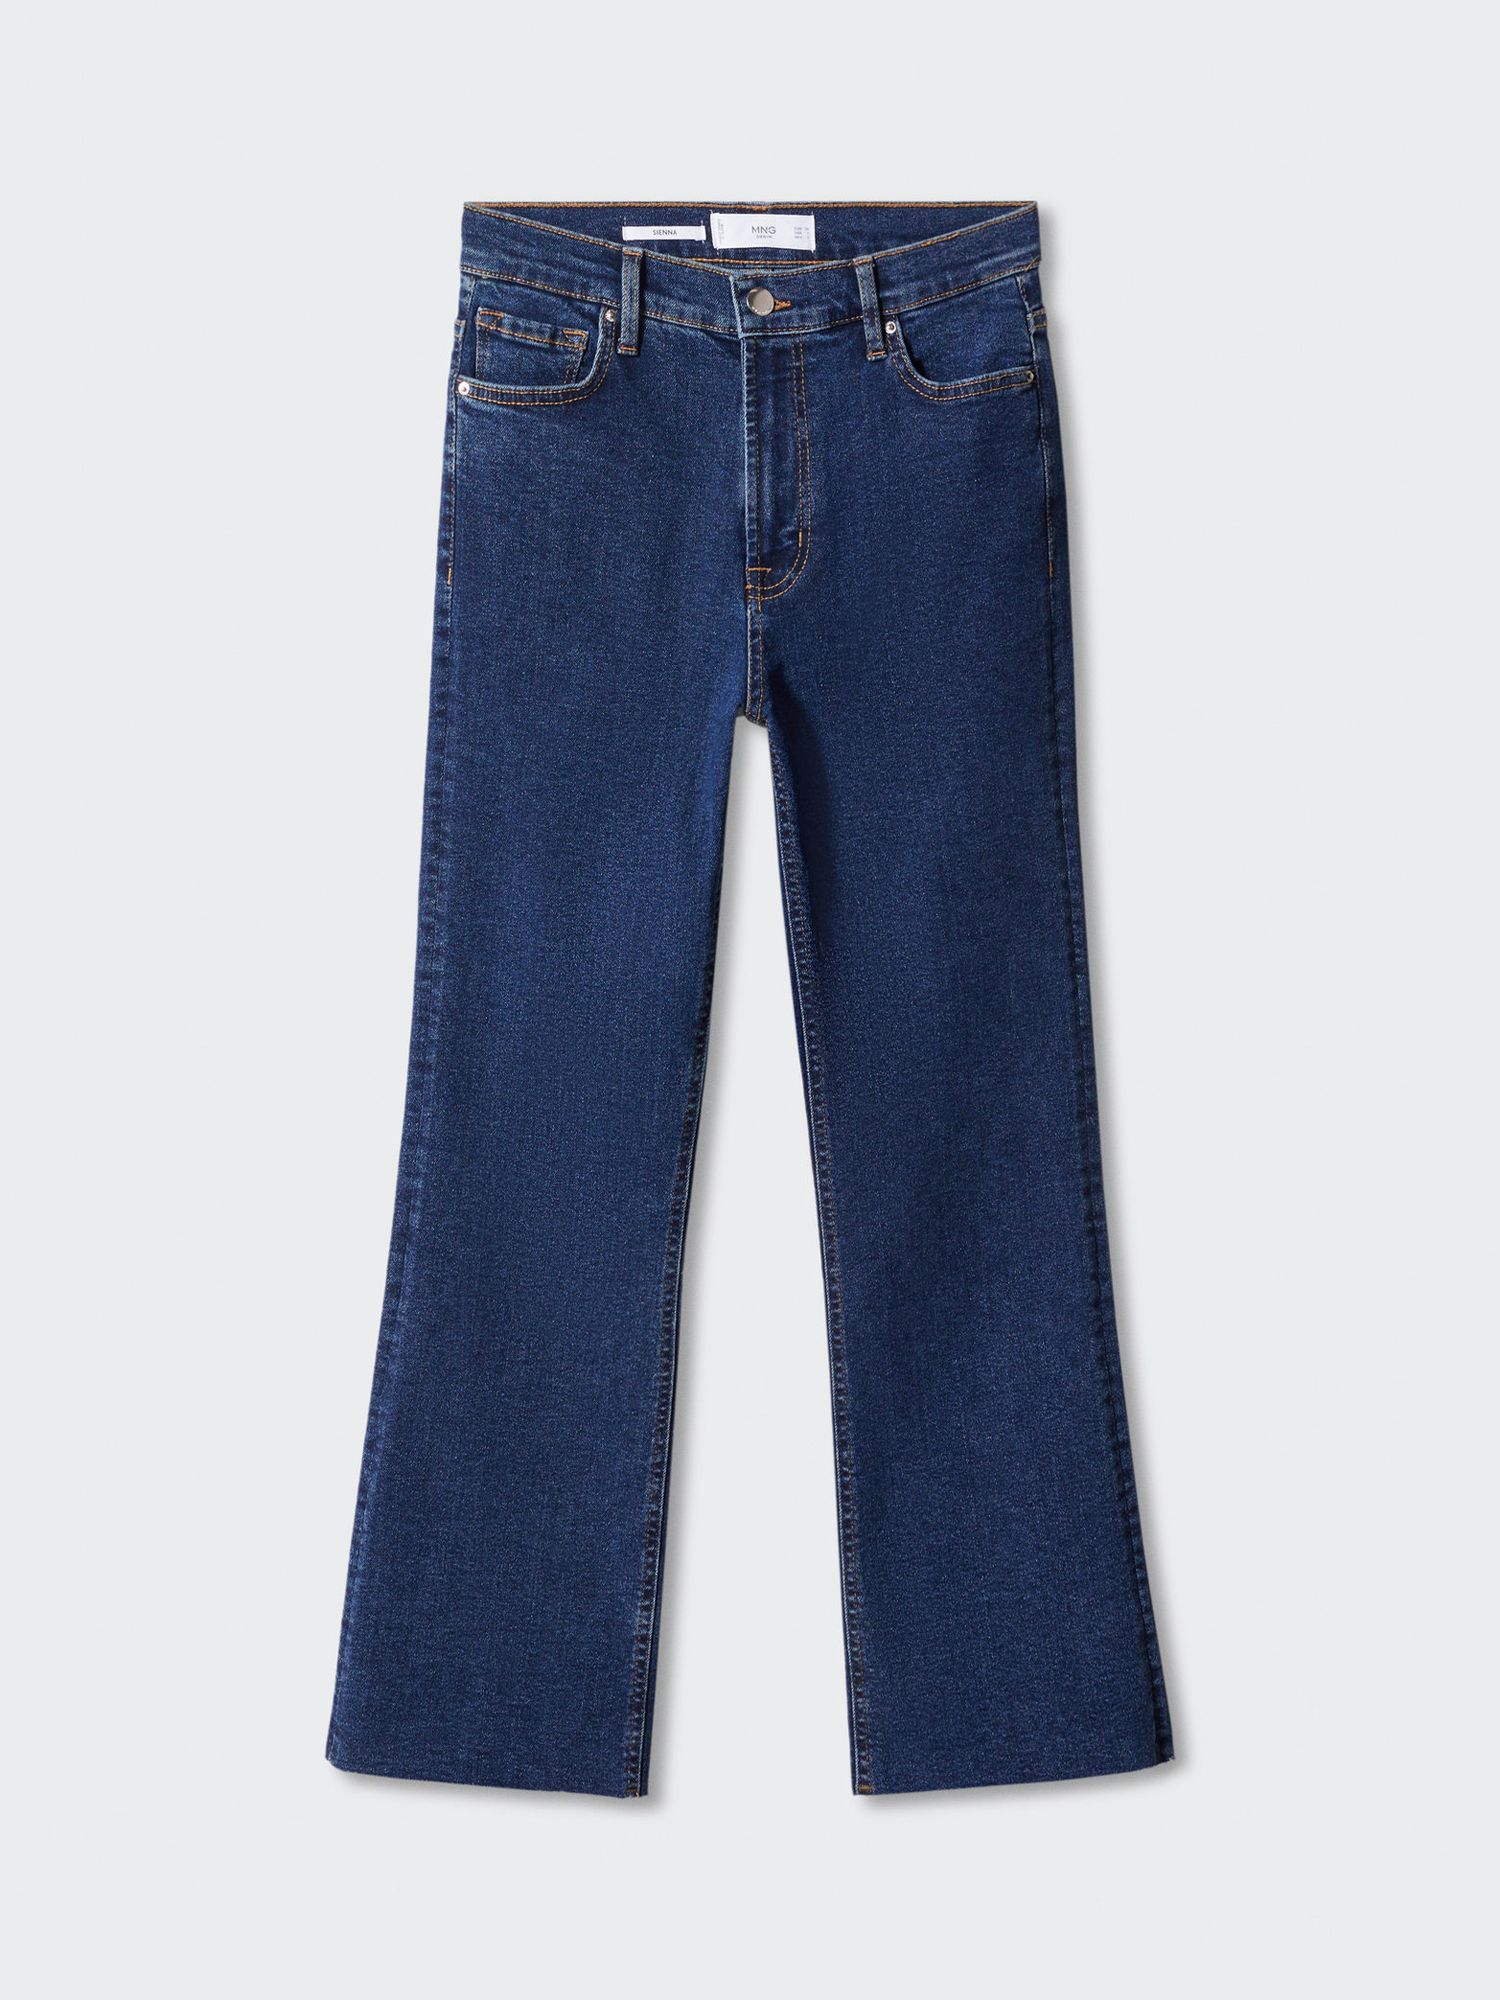 Mango Sienne Cropped Flared Jeans, Open Blue at John Lewis & Partners